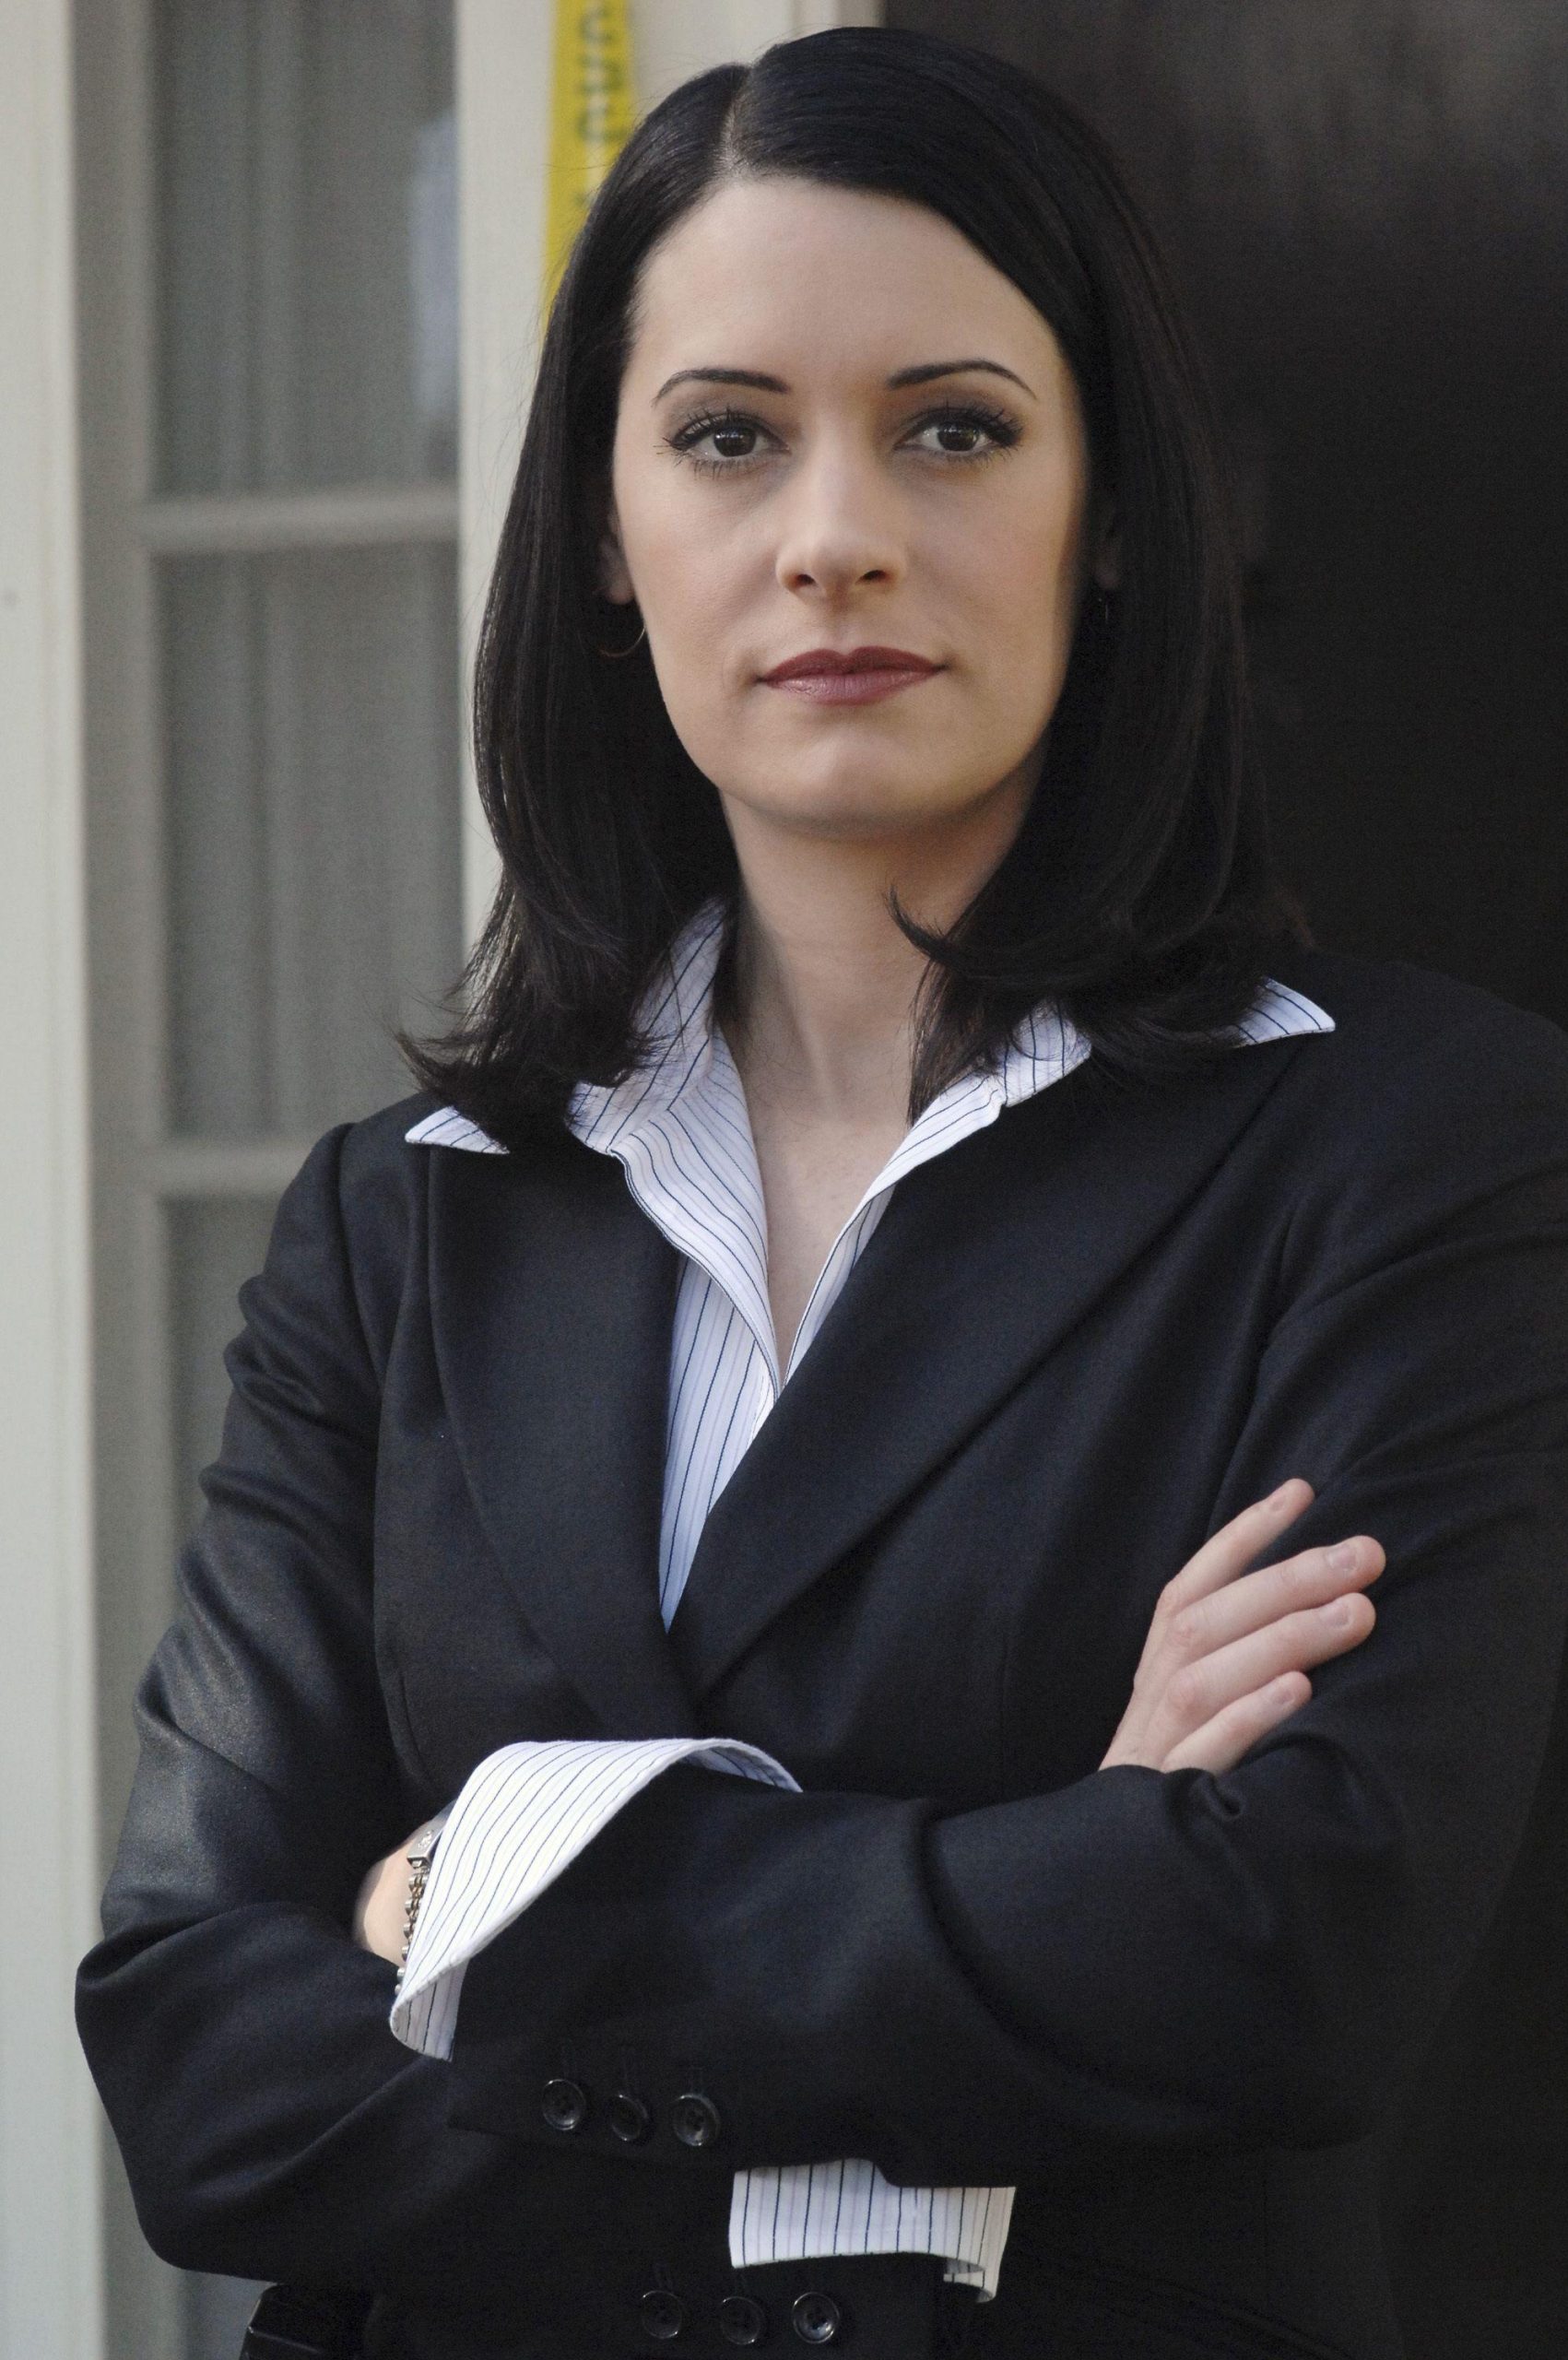 70+ Hot Pictures Of Paget Brewster From Criminal Minds Will Brighten Up Your Day 281